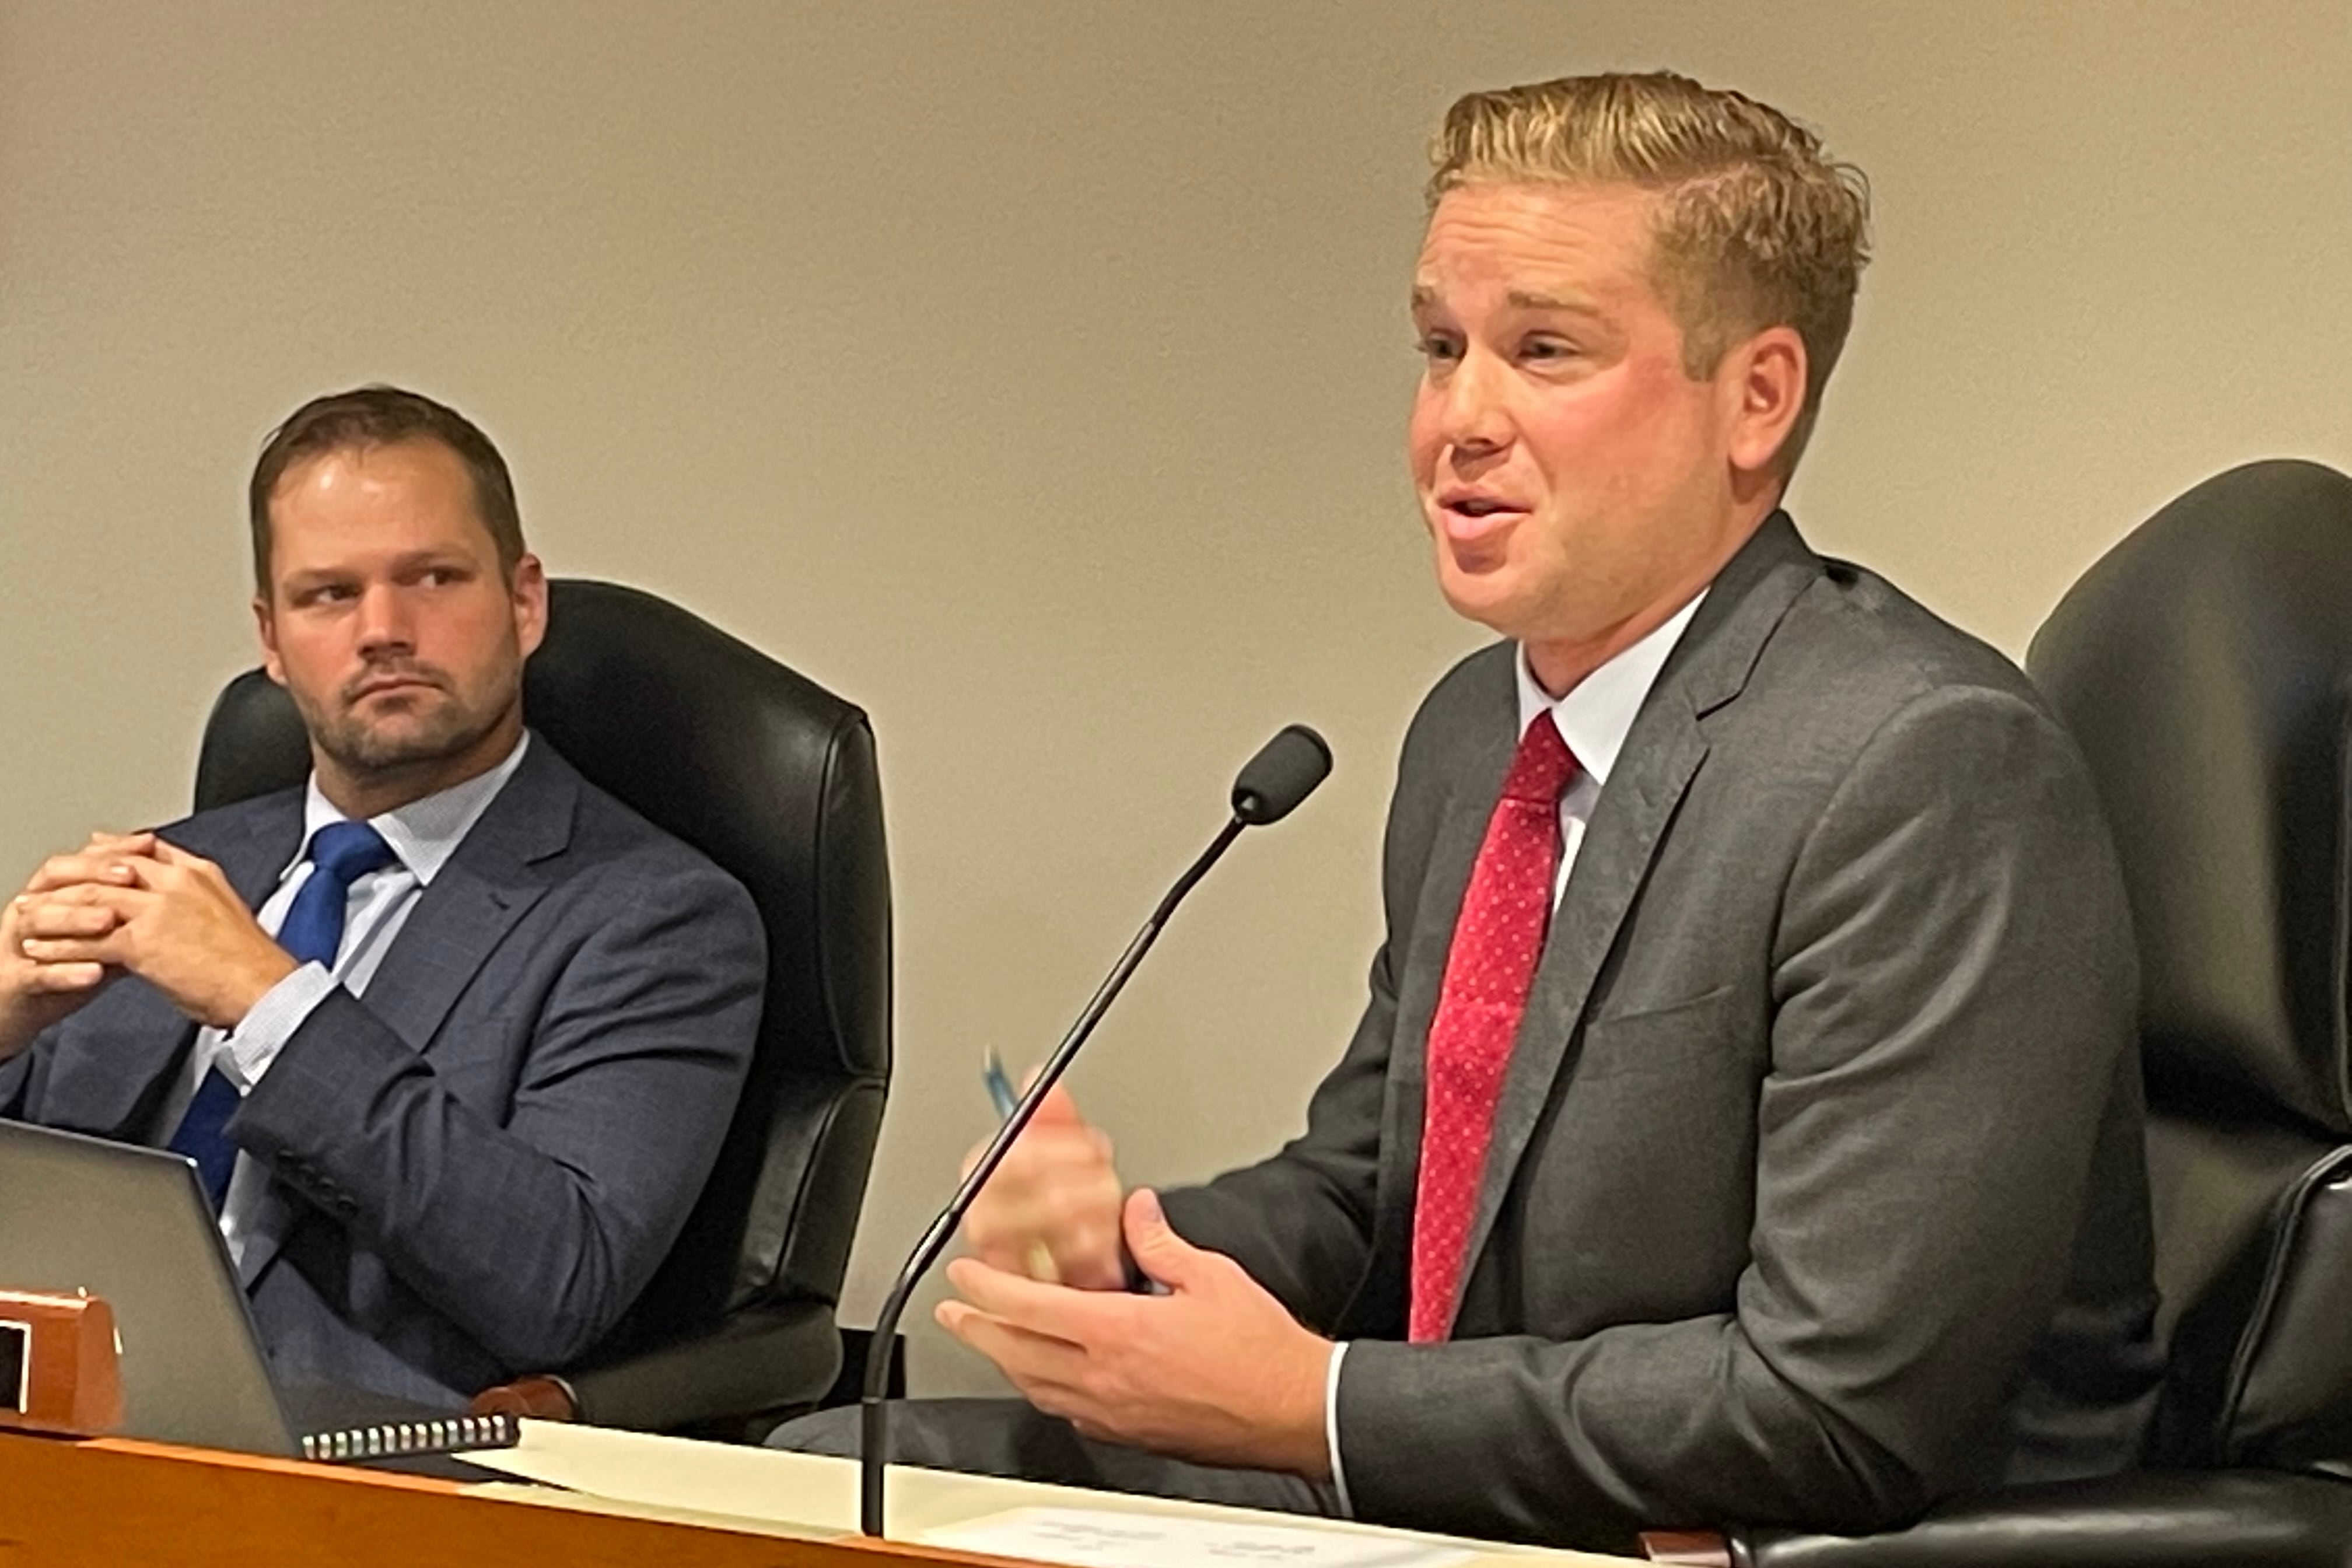 Republican state Rep. Andrew Beeler speaks in front of a microphone in a committee room while Republican Rep. Bryran Posthumus looks on.